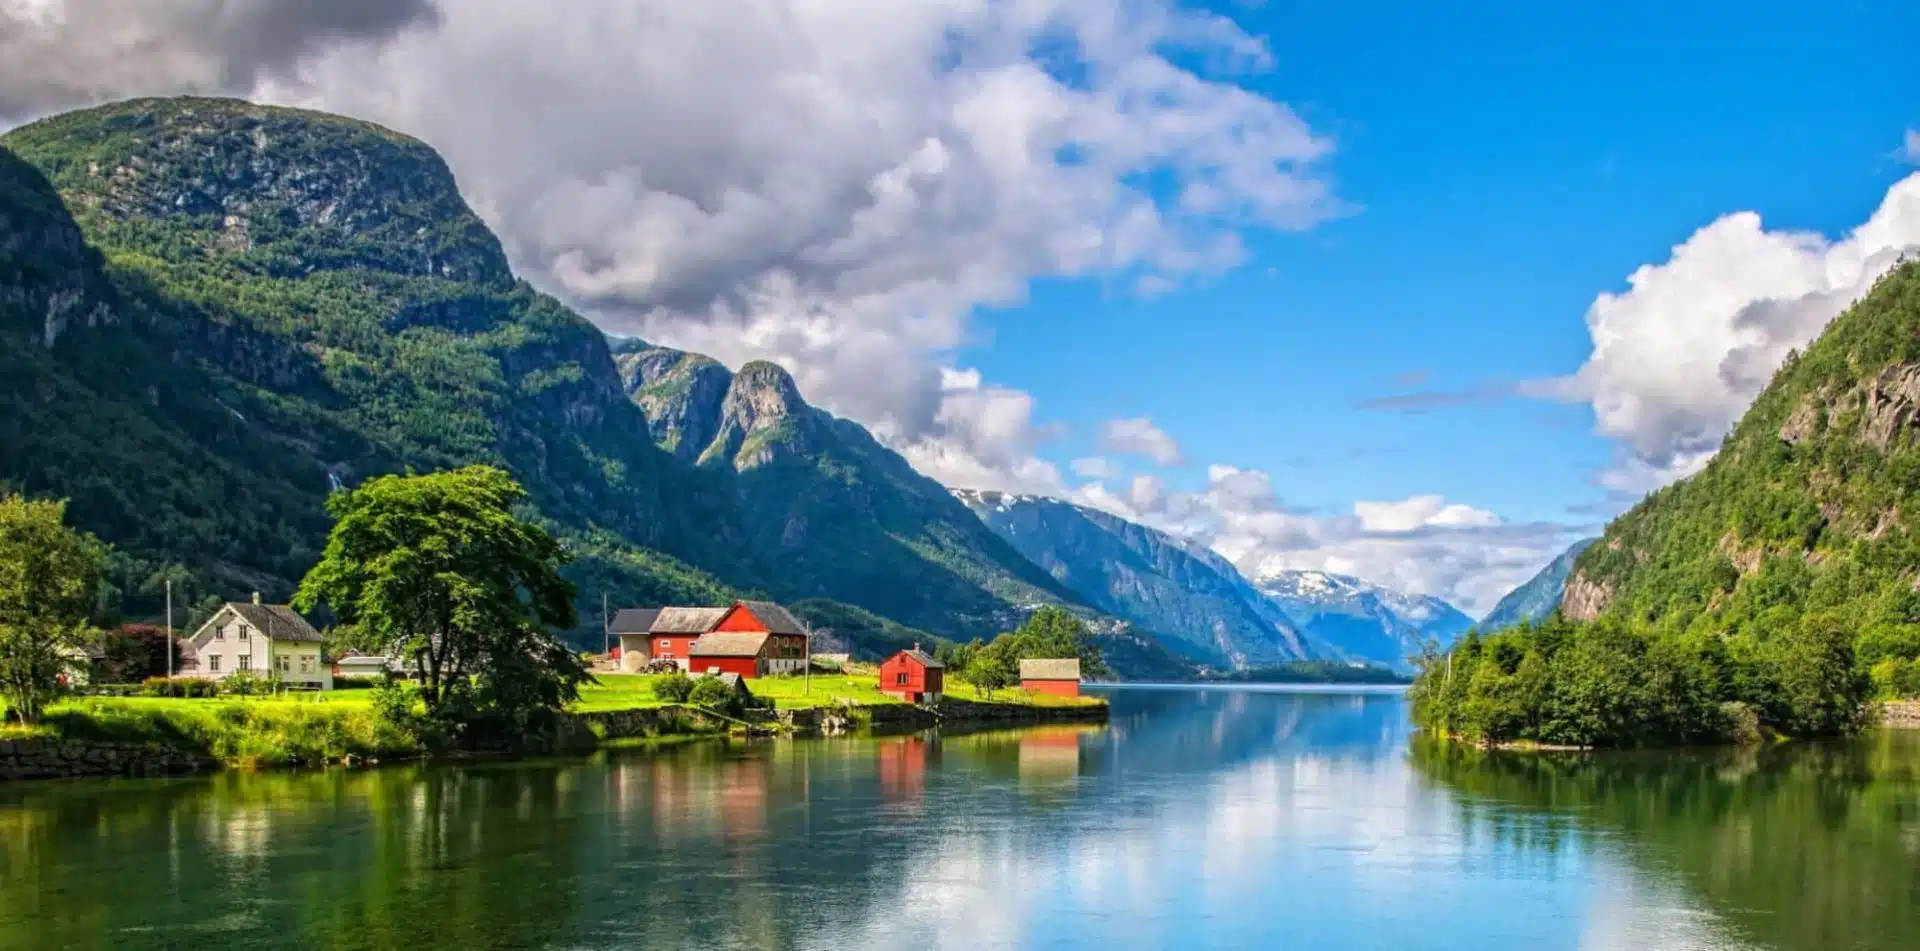 Enjoy the beautiful view in Norway